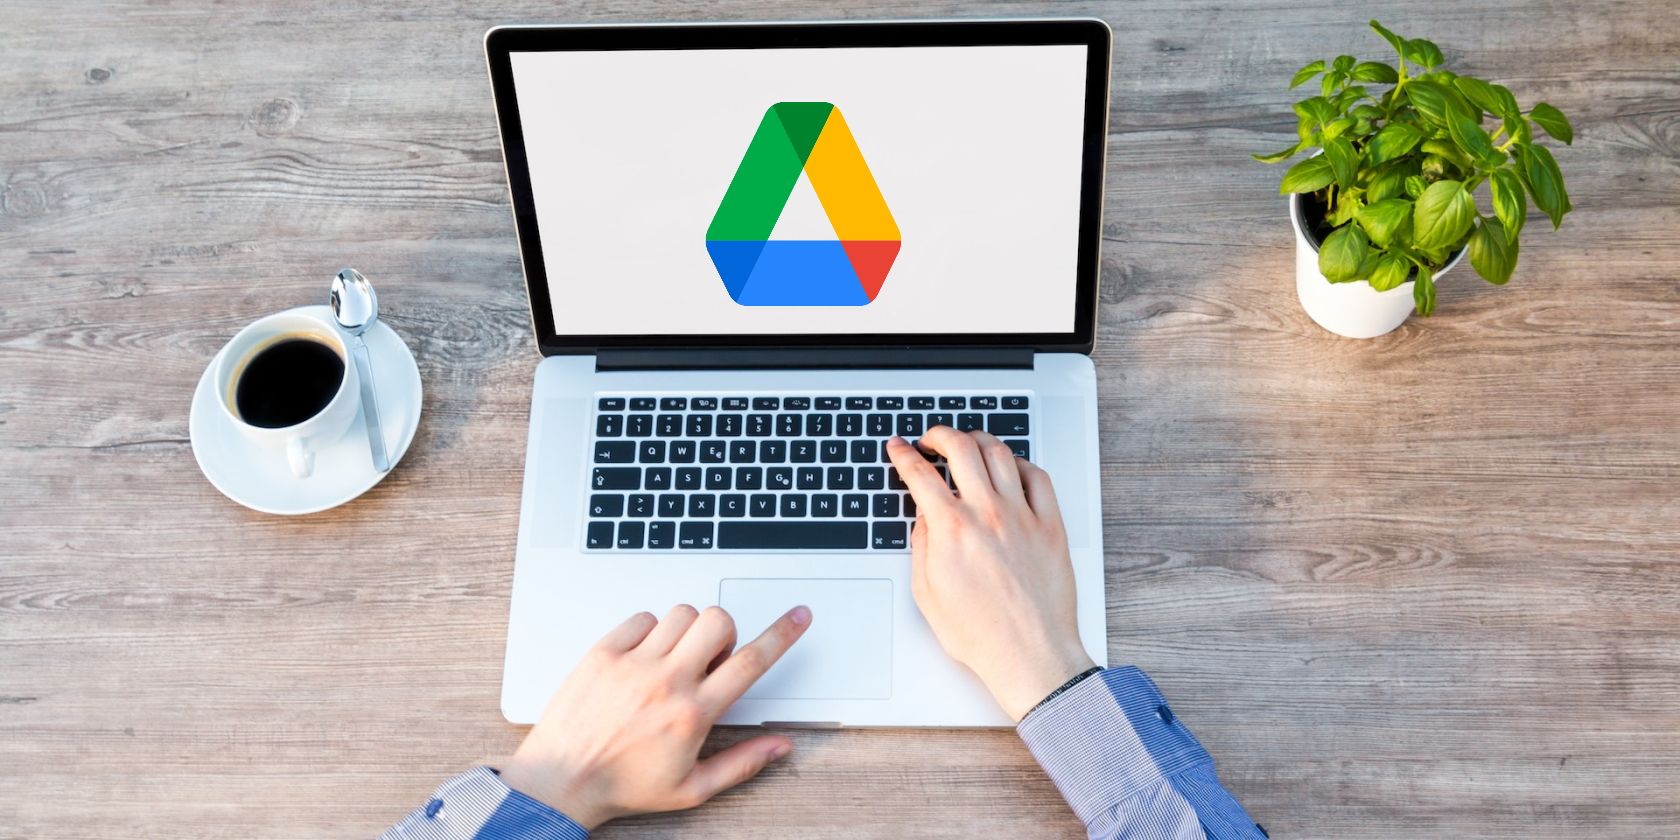 7 Ways to Fix Google Drive Not Syncing on Windows